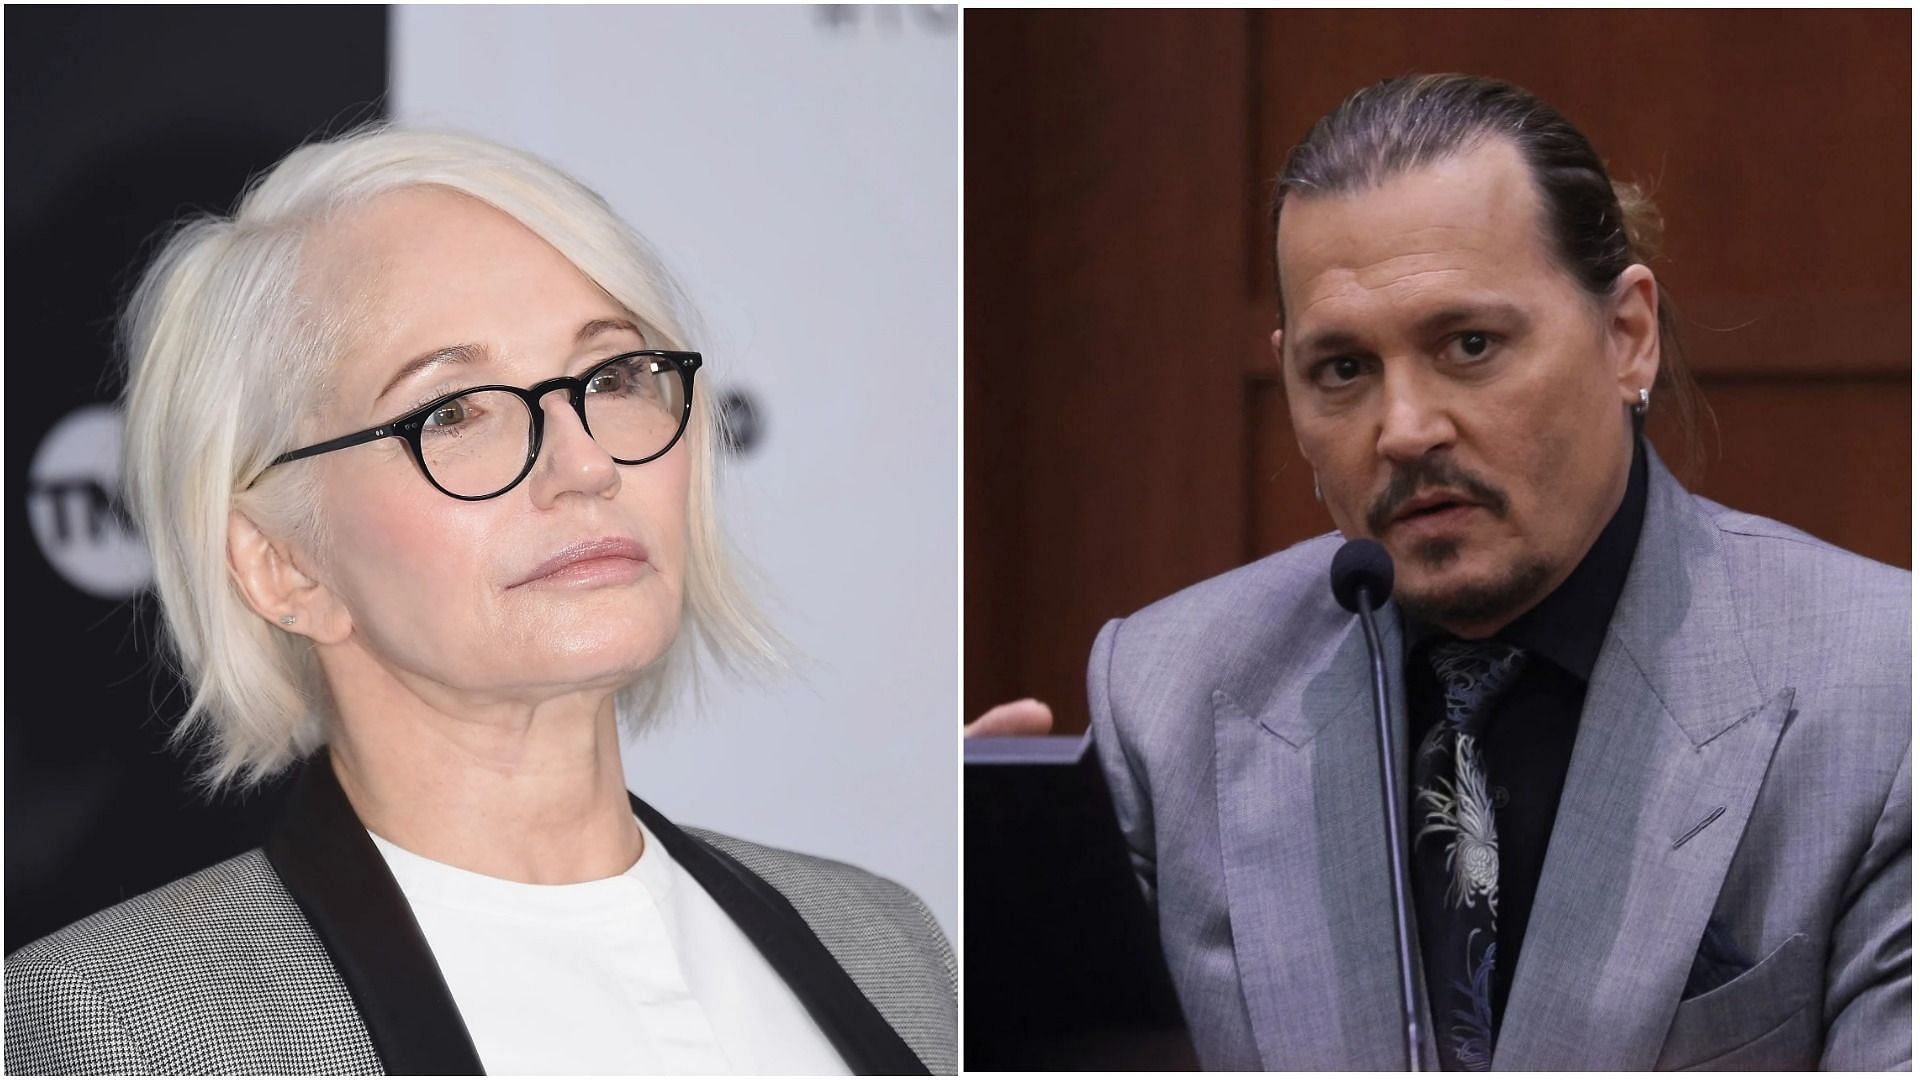 Ellen Barkin to testify against Johnny Depp (Images via Gary Gershoff/WireImage/Getty Images, and Evelyn Hocksteinp/Pool/AFP/Getty Images)